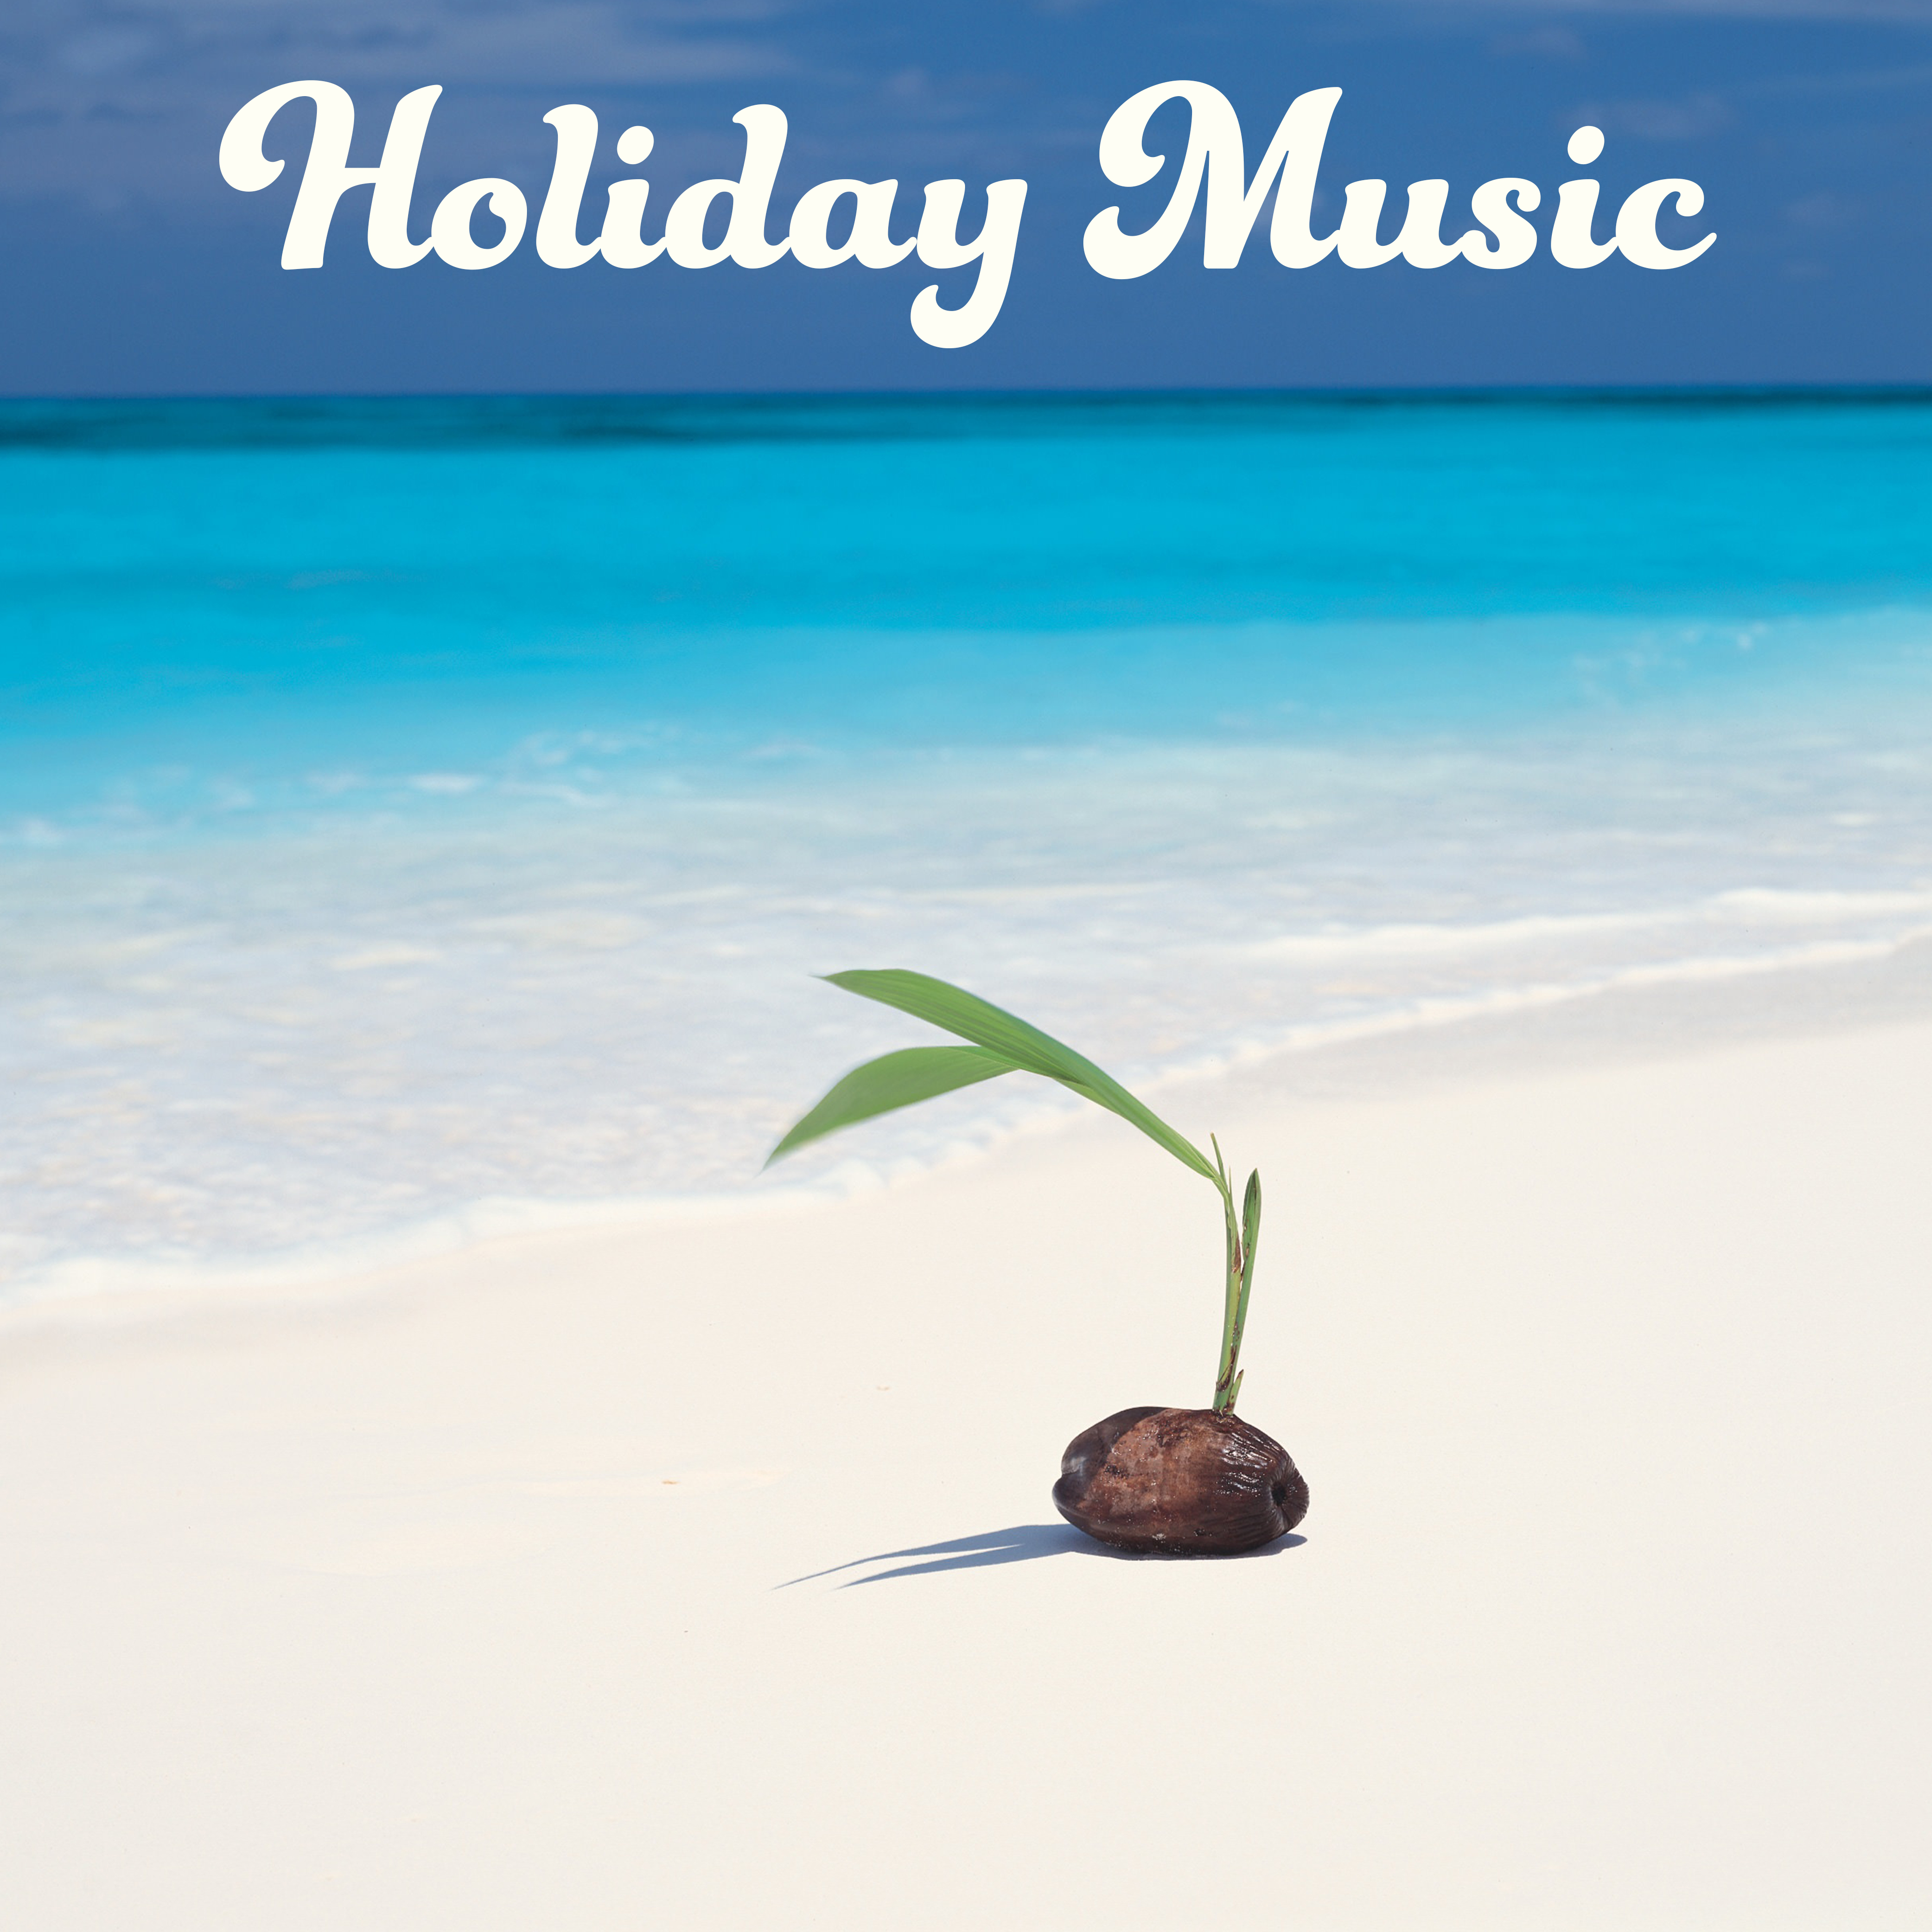 Holiday Music  Beach Chill, Relaxation Sounds for Mind, Summertime, Peaceful Music to Rest, Chill Out Under Plams